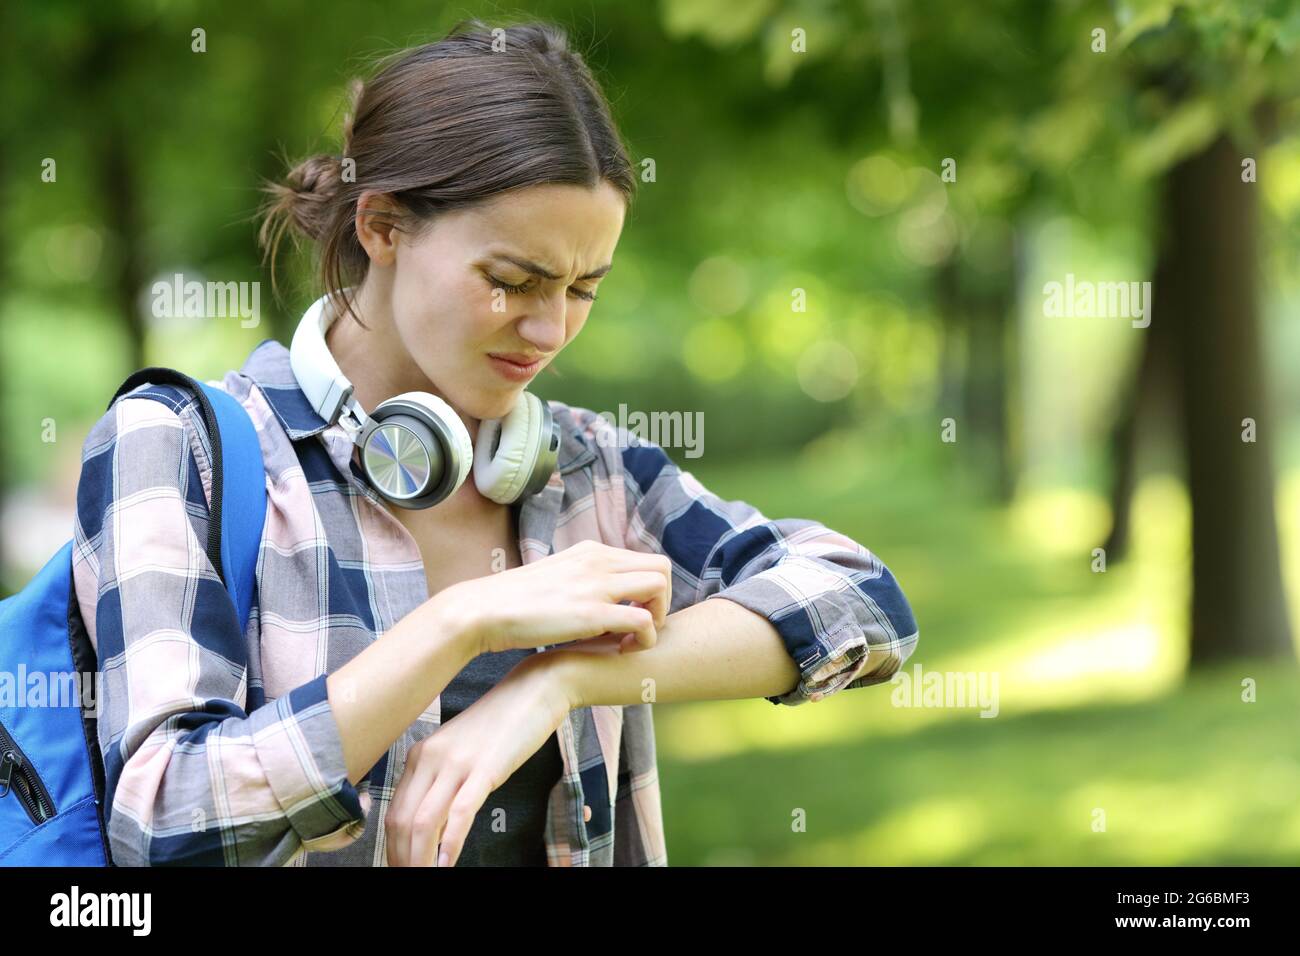 Allergic student scratching itchy arm in a park or campus Stock Photo